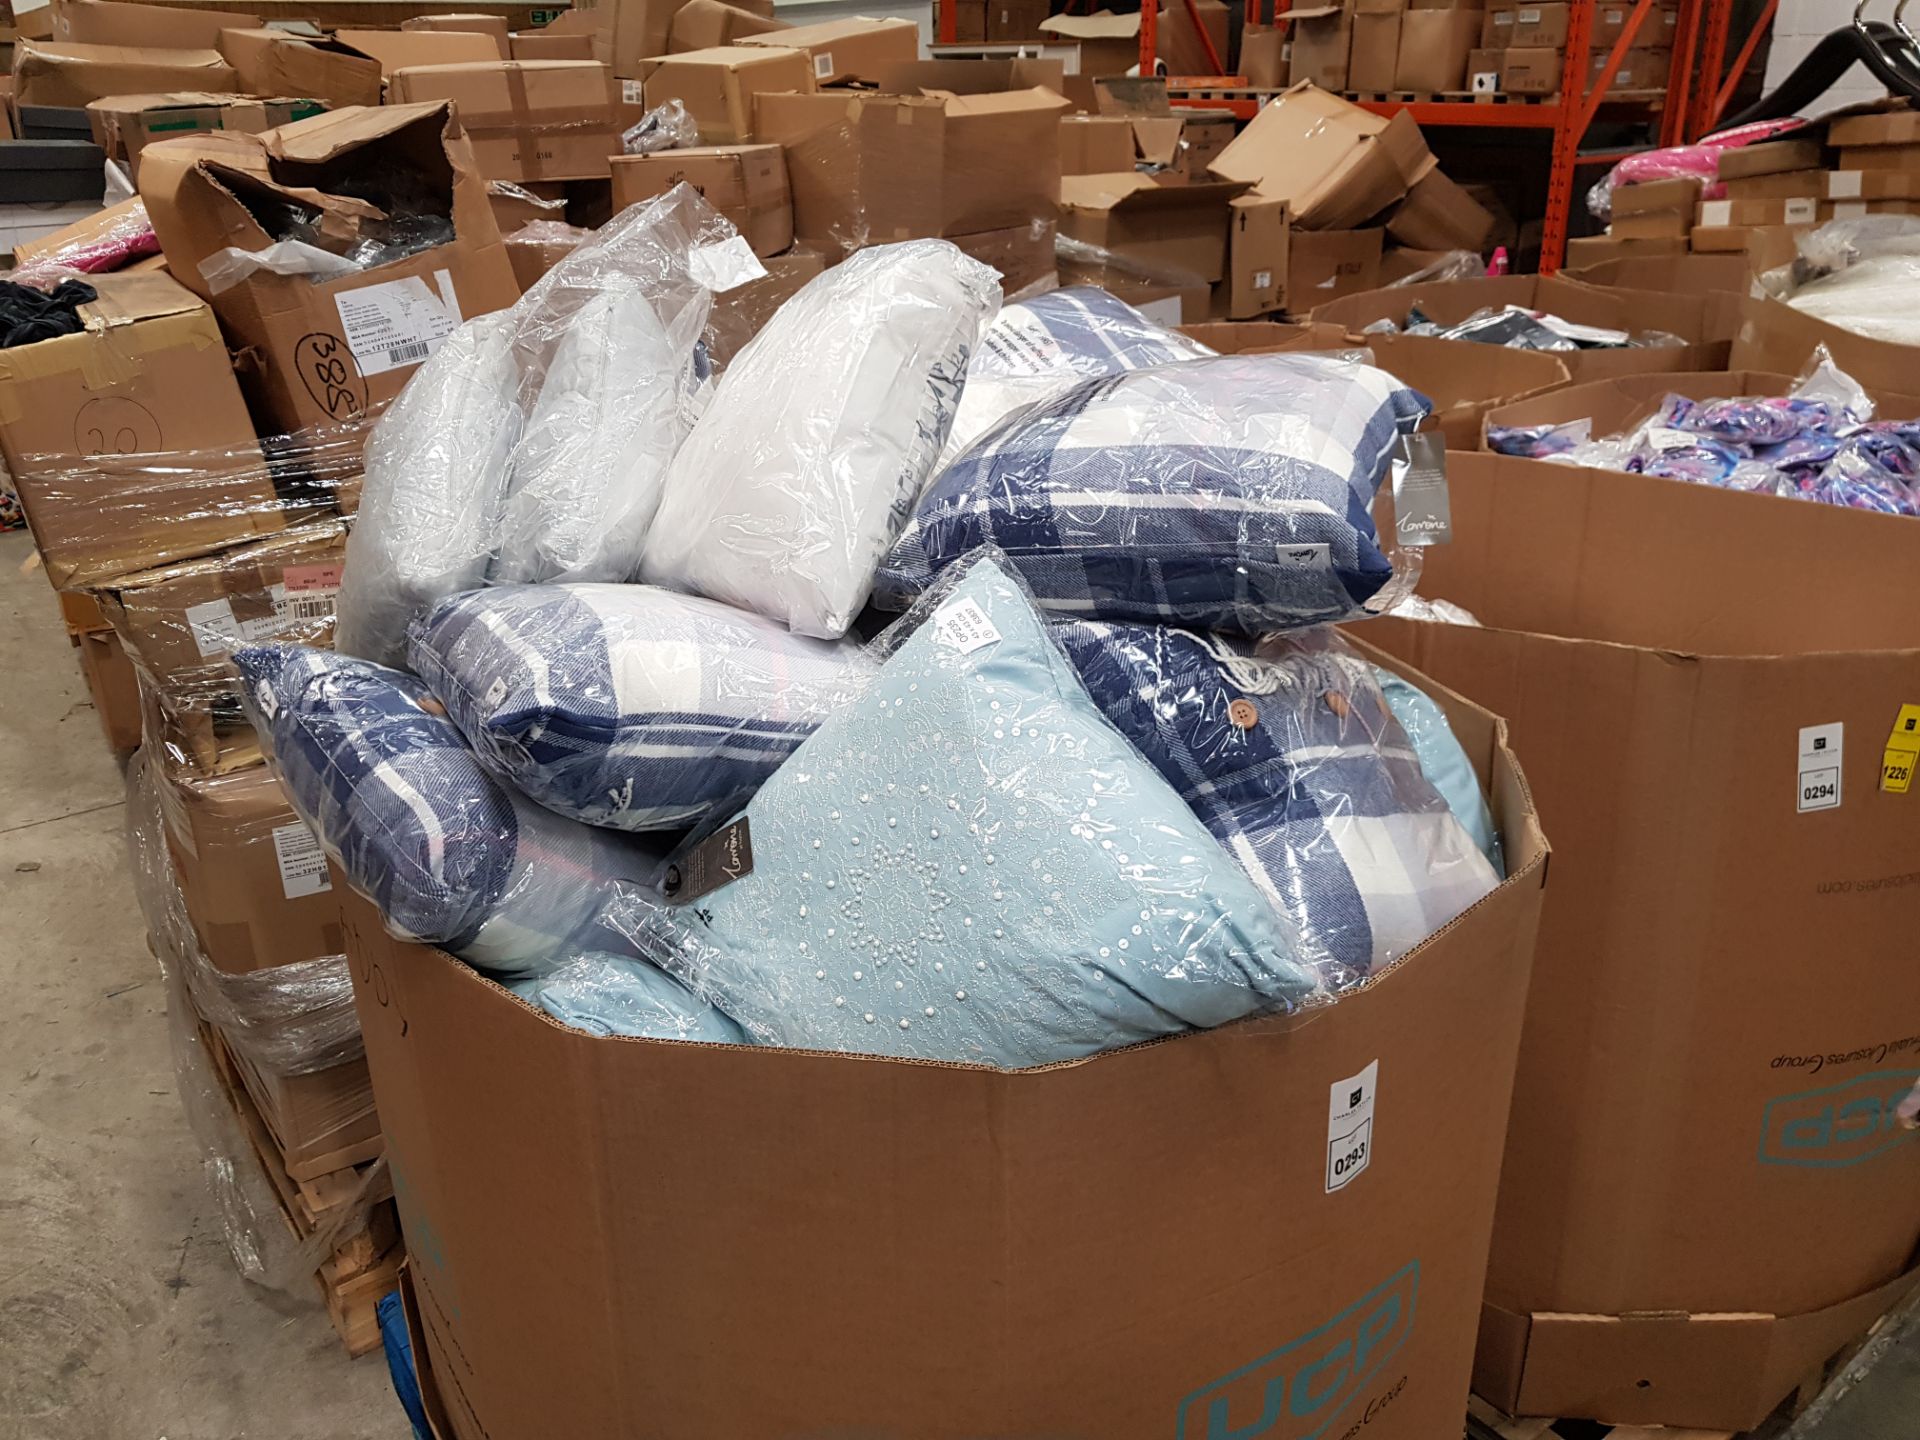 FULL PALLET OF RINGLEY CUSHIONS, TESCO CUSHIONS AND OTHER STYLES OF CUSHIONS